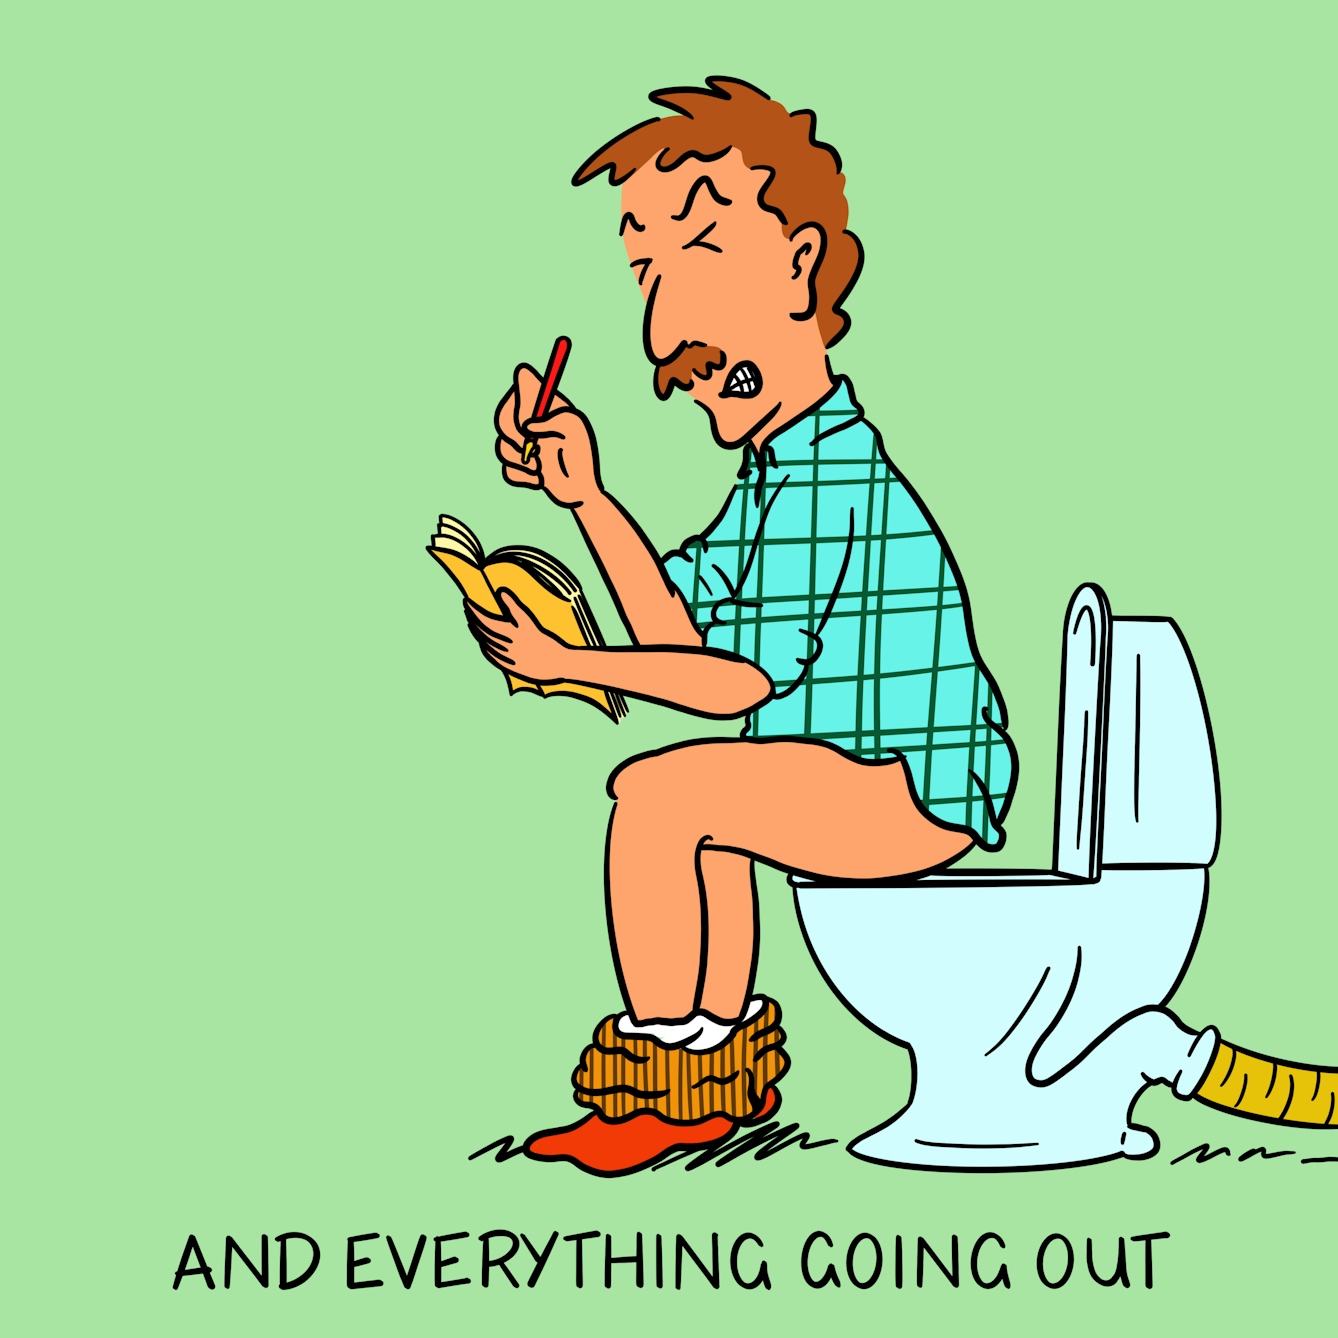 Panel 2 of a four-panel comic drawn digitally: a white man with a moustache and a plaid shirt sits on the toilet with corduroy trousers around his ankles. His face is clenched and his hand is poised with a pen ready to write in a notebook held in his other hand. The caption text reads "... and everything going out"